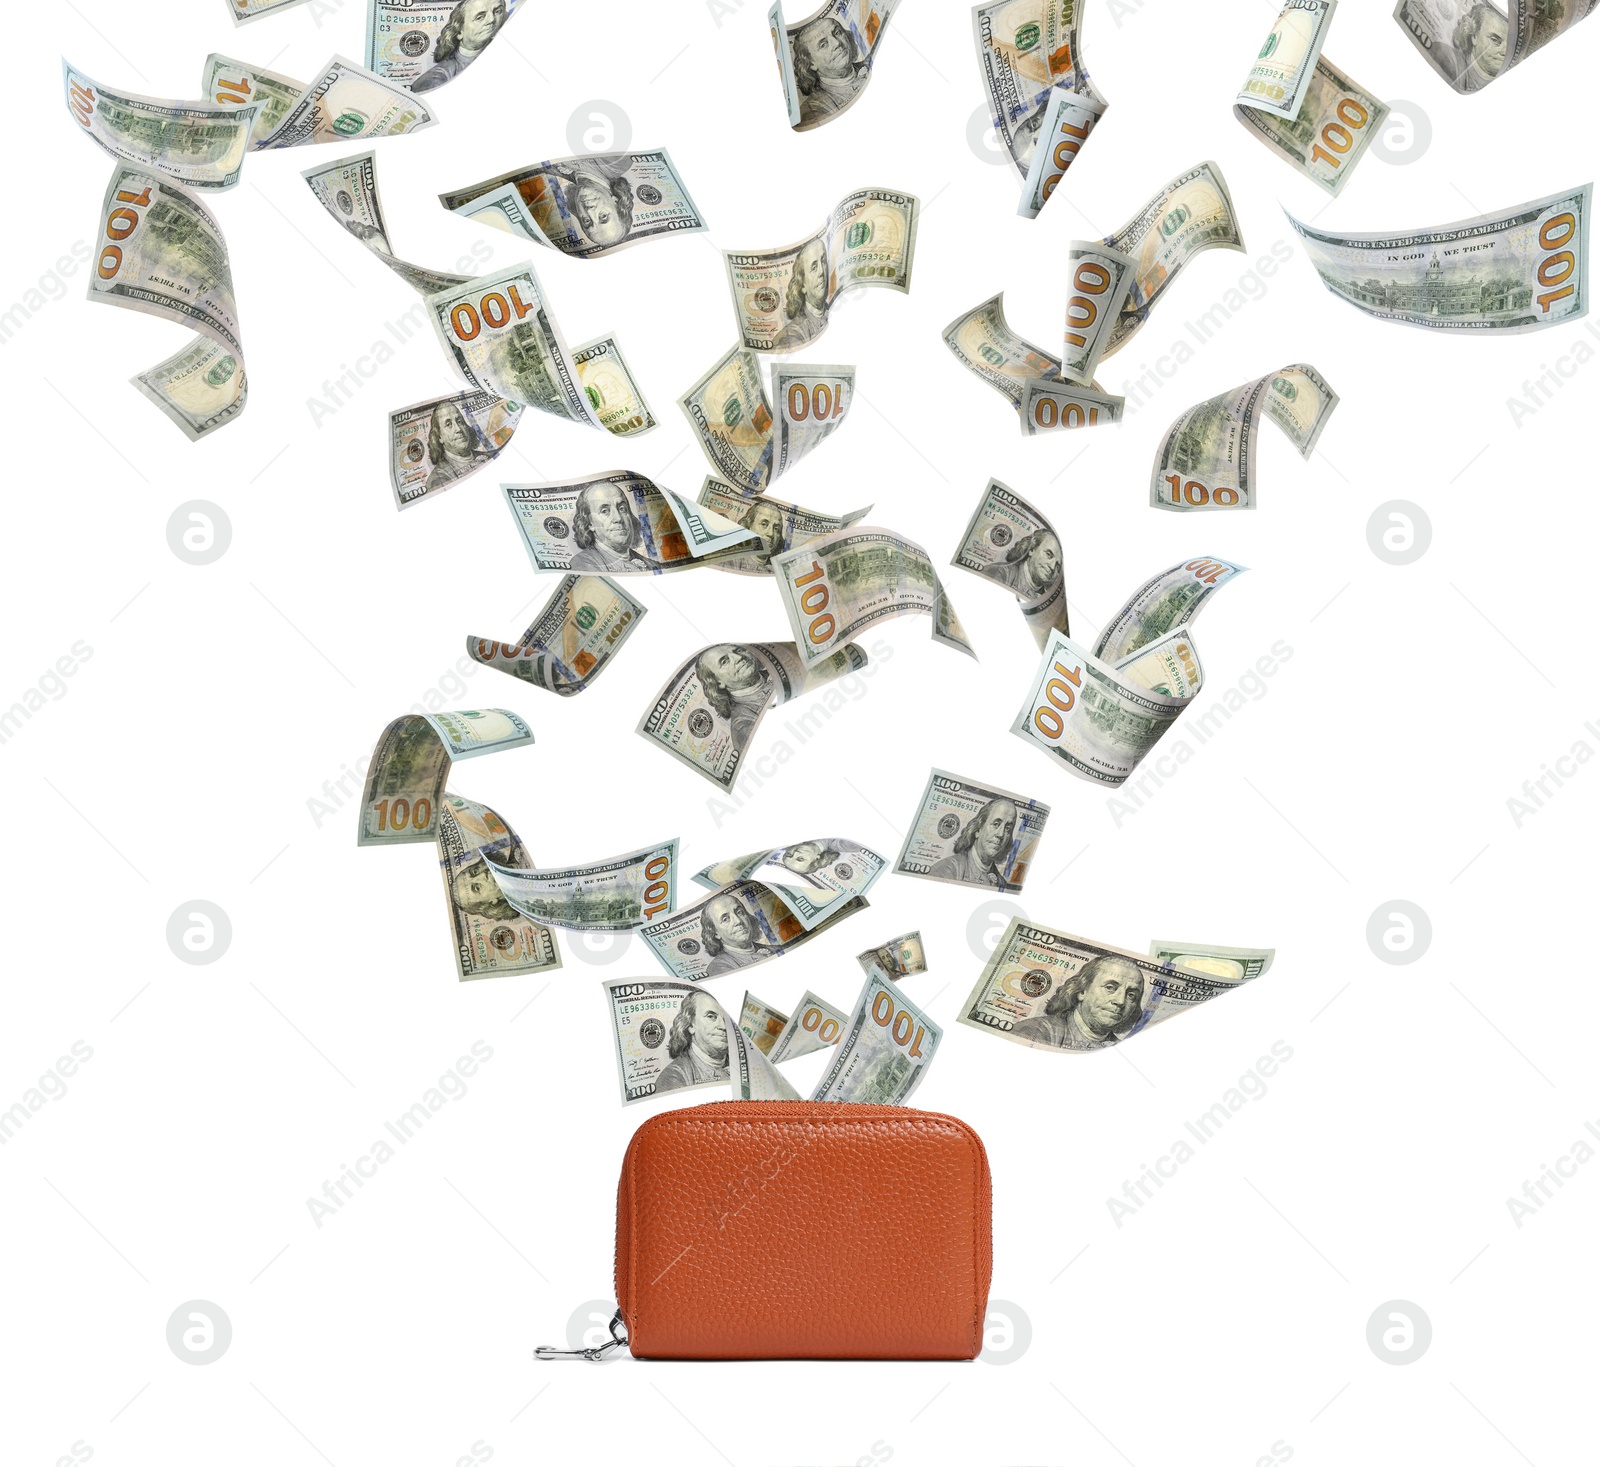 Image of Dollar banknotes falling into purse on white background